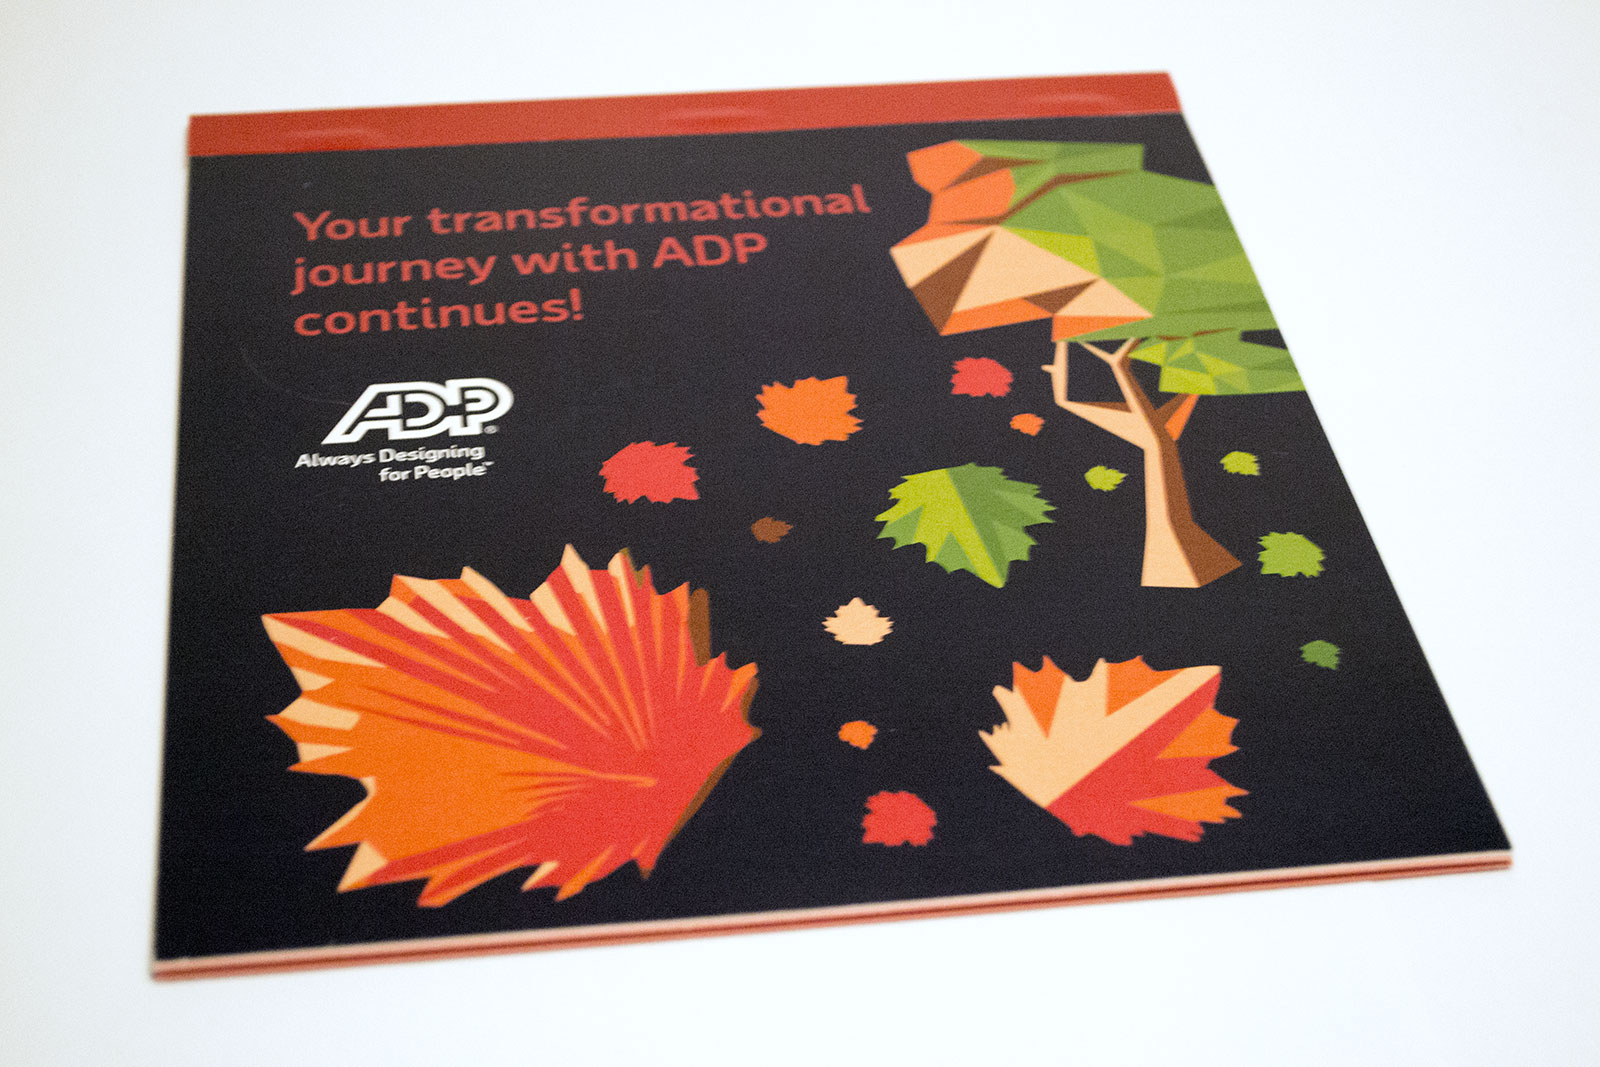 Origami book 2 Your transformational journey with ADP continues! with the ADP Always designing for people logo underneath